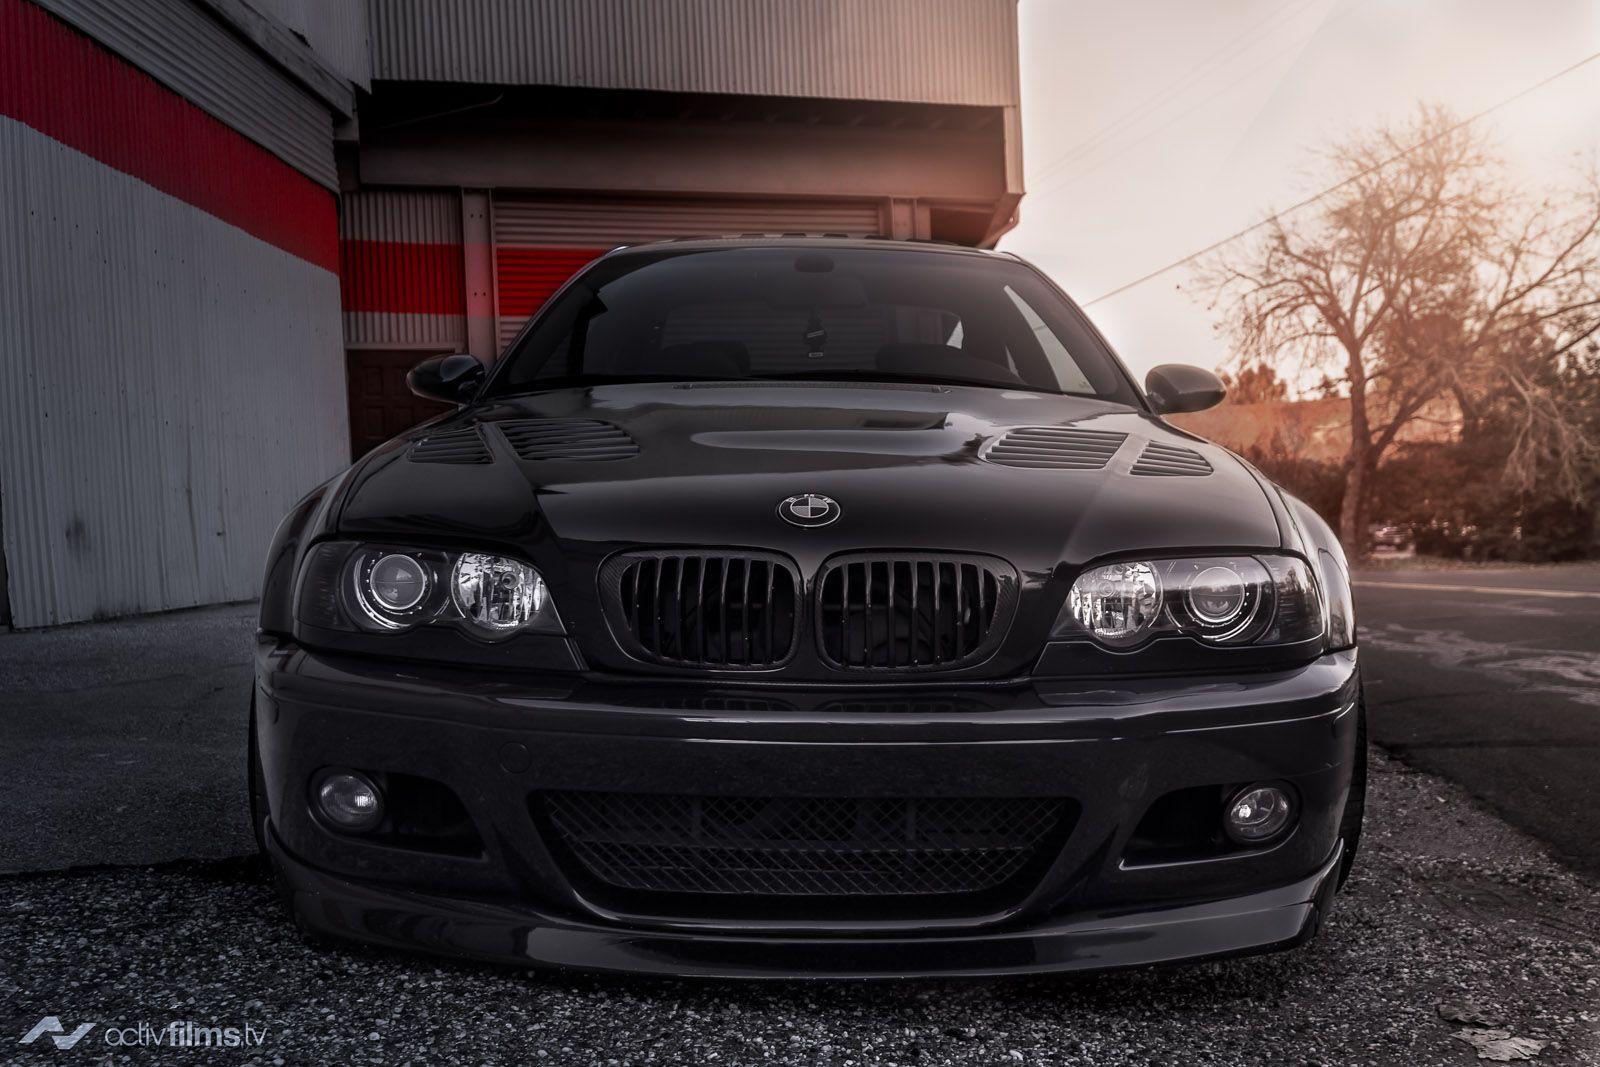 Bmw E46 4k Wallpapers Top Free Bmw E46 4k Backgrounds Images, Photos, Reviews